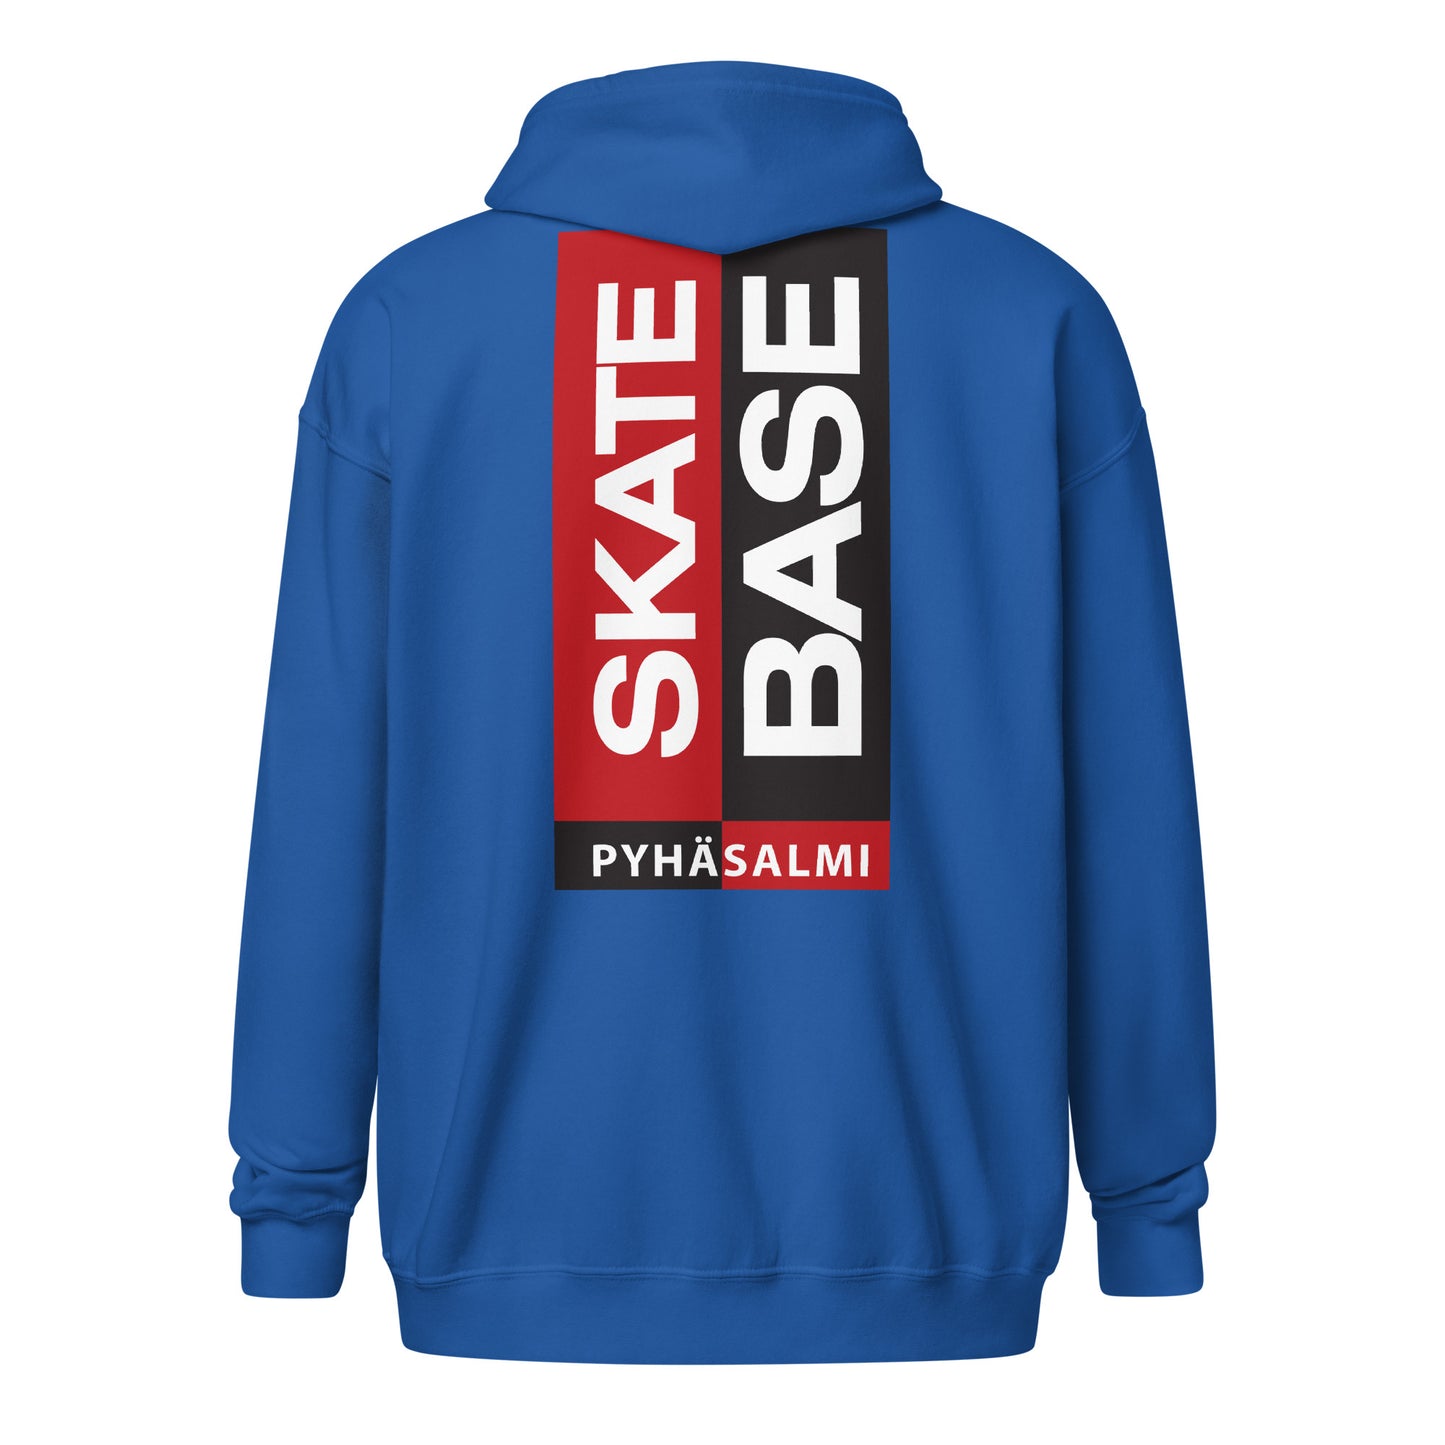 "Skate Base" unisex hoodie with zipper (front and back printing)